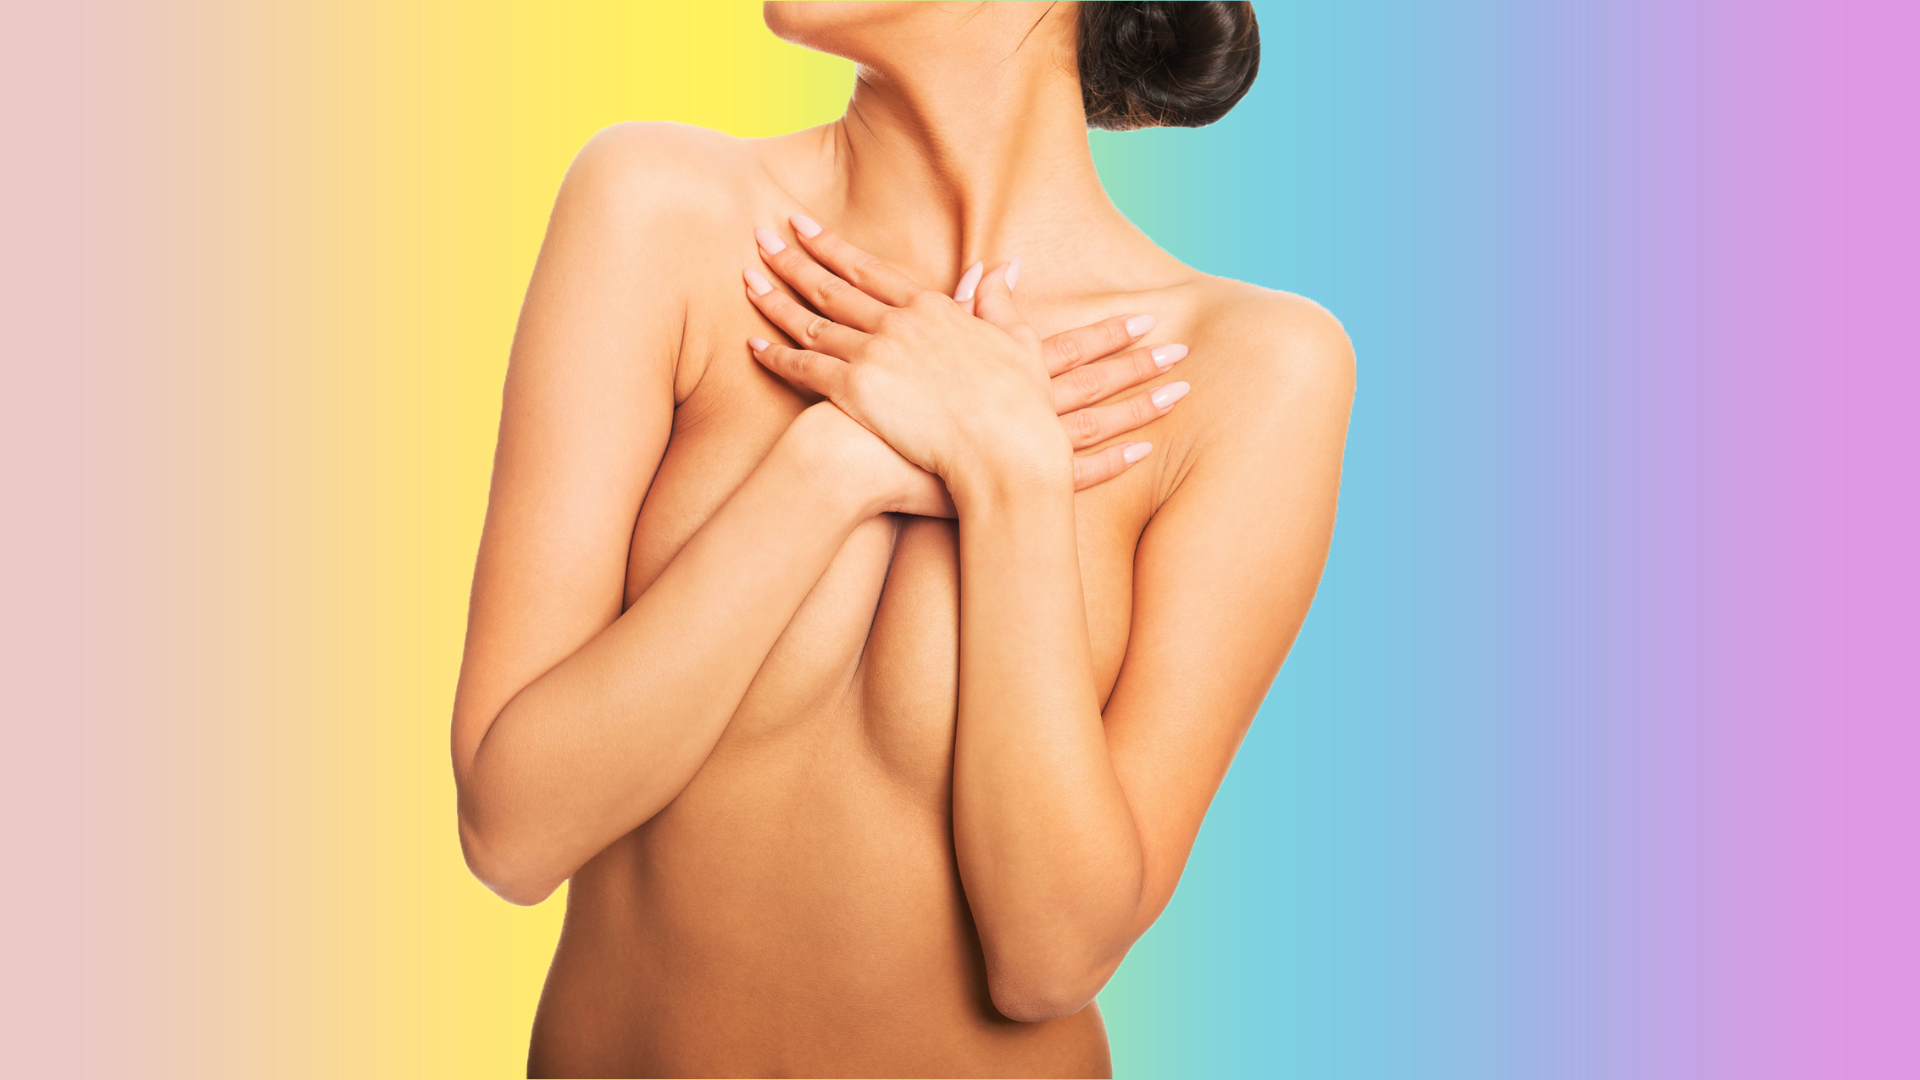 Breast Massage Benefits Are Hard to Prove, But I Loved It image